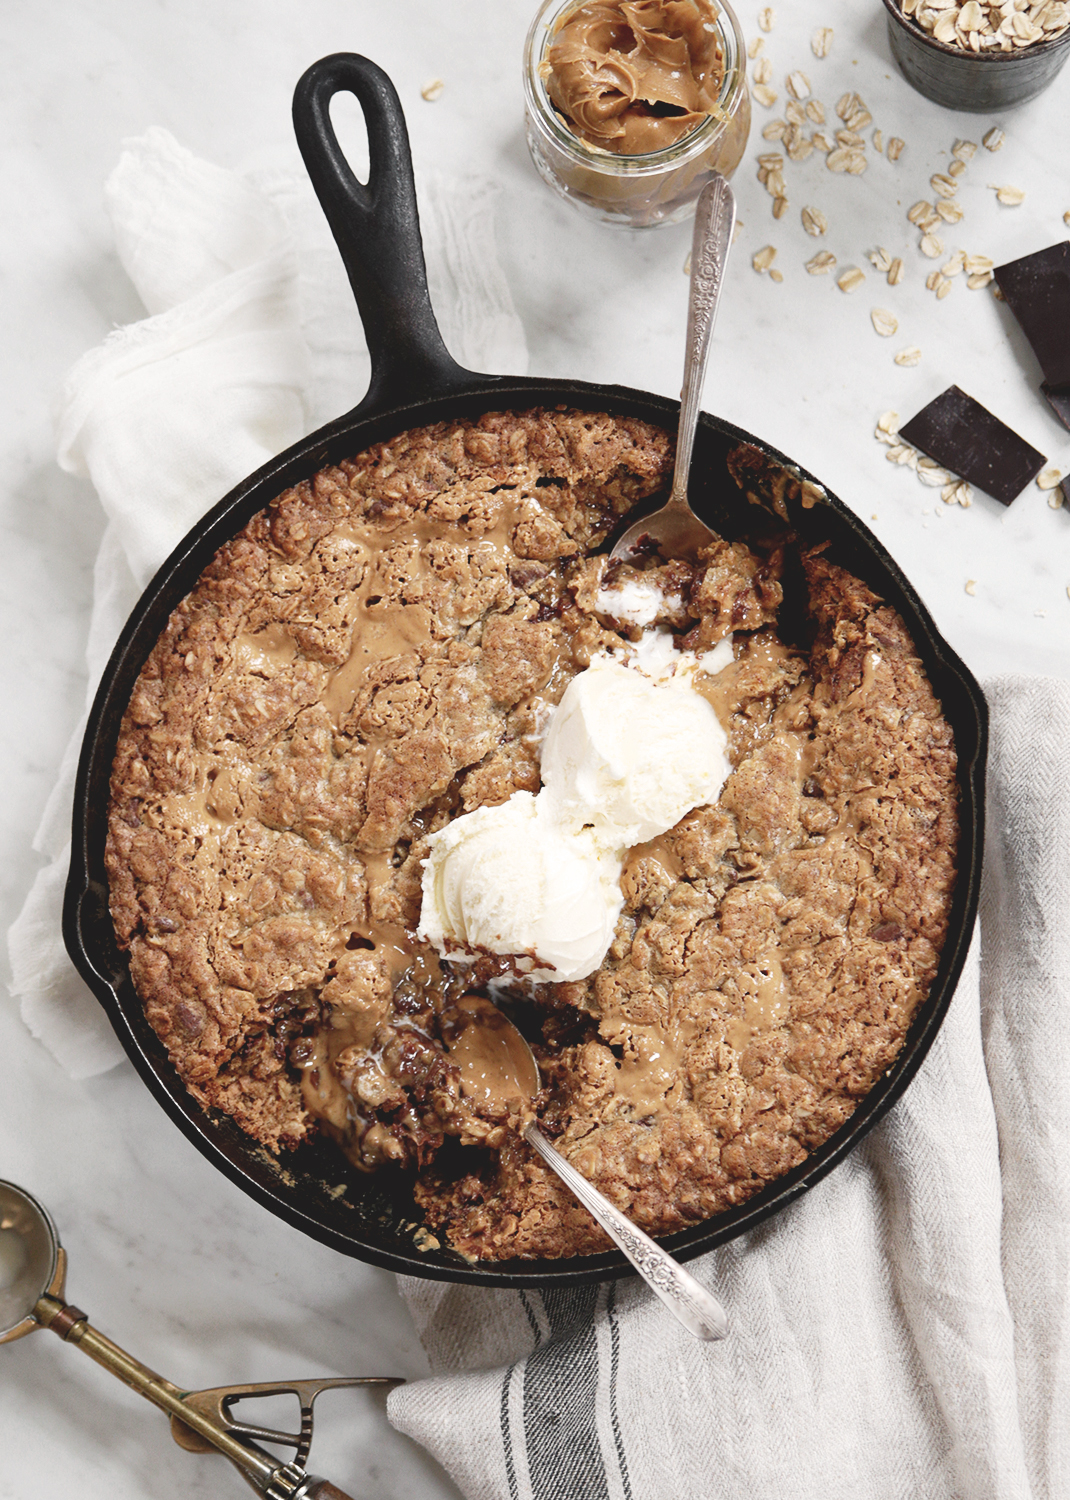 Peanut Butter Oatmeal Chocolate Chip Skillet Cookie